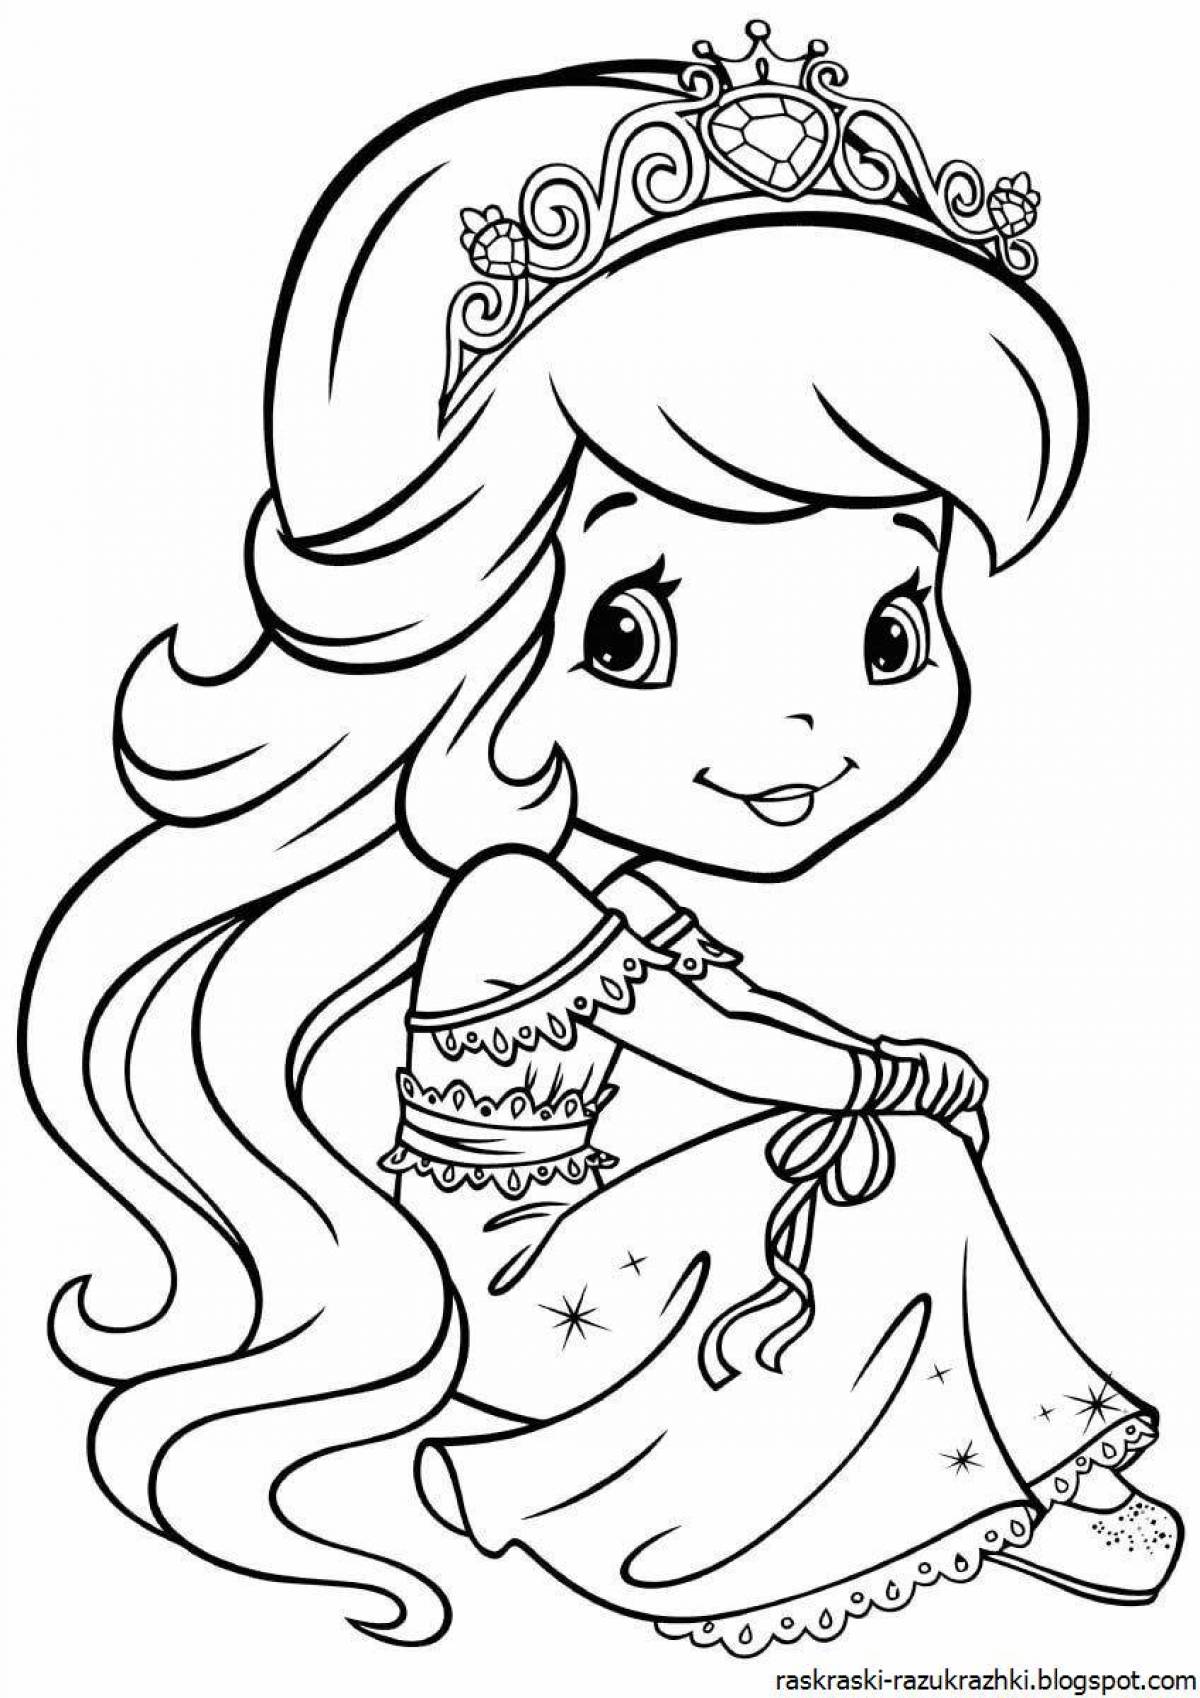 Decorated princess coloring book for children 5-6 years old